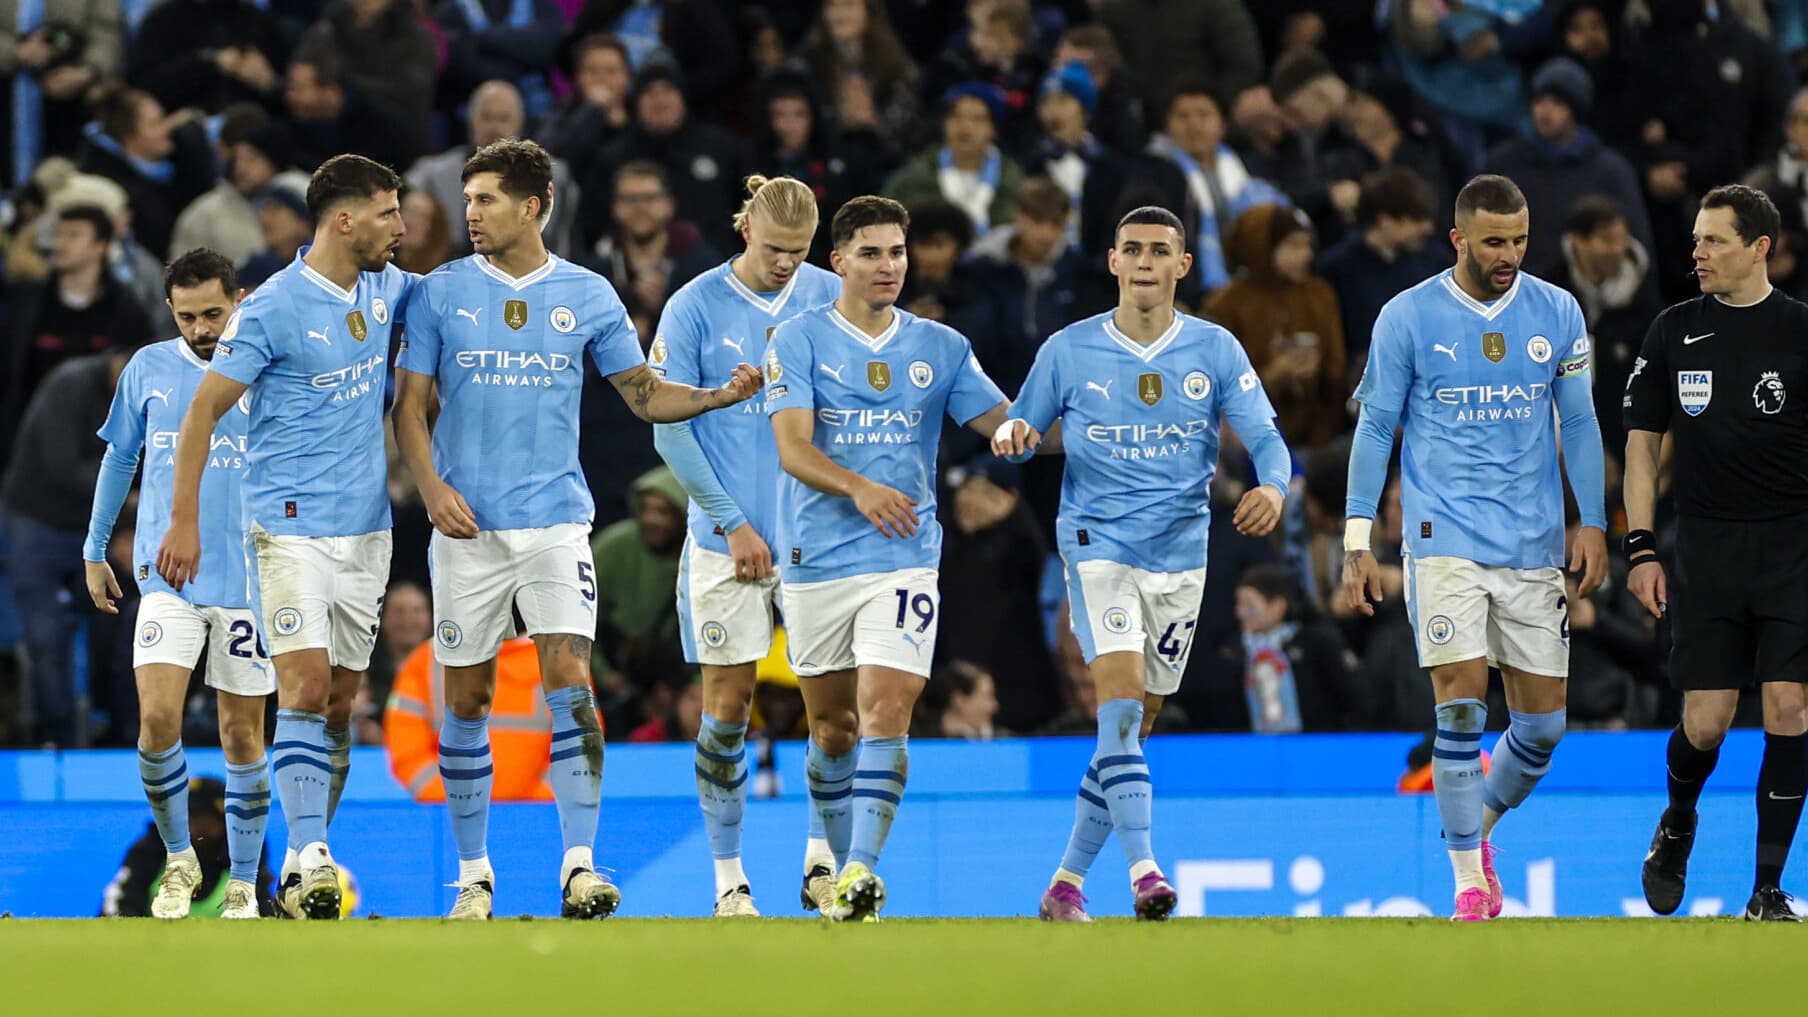 Manchester City crowned champions of England if…